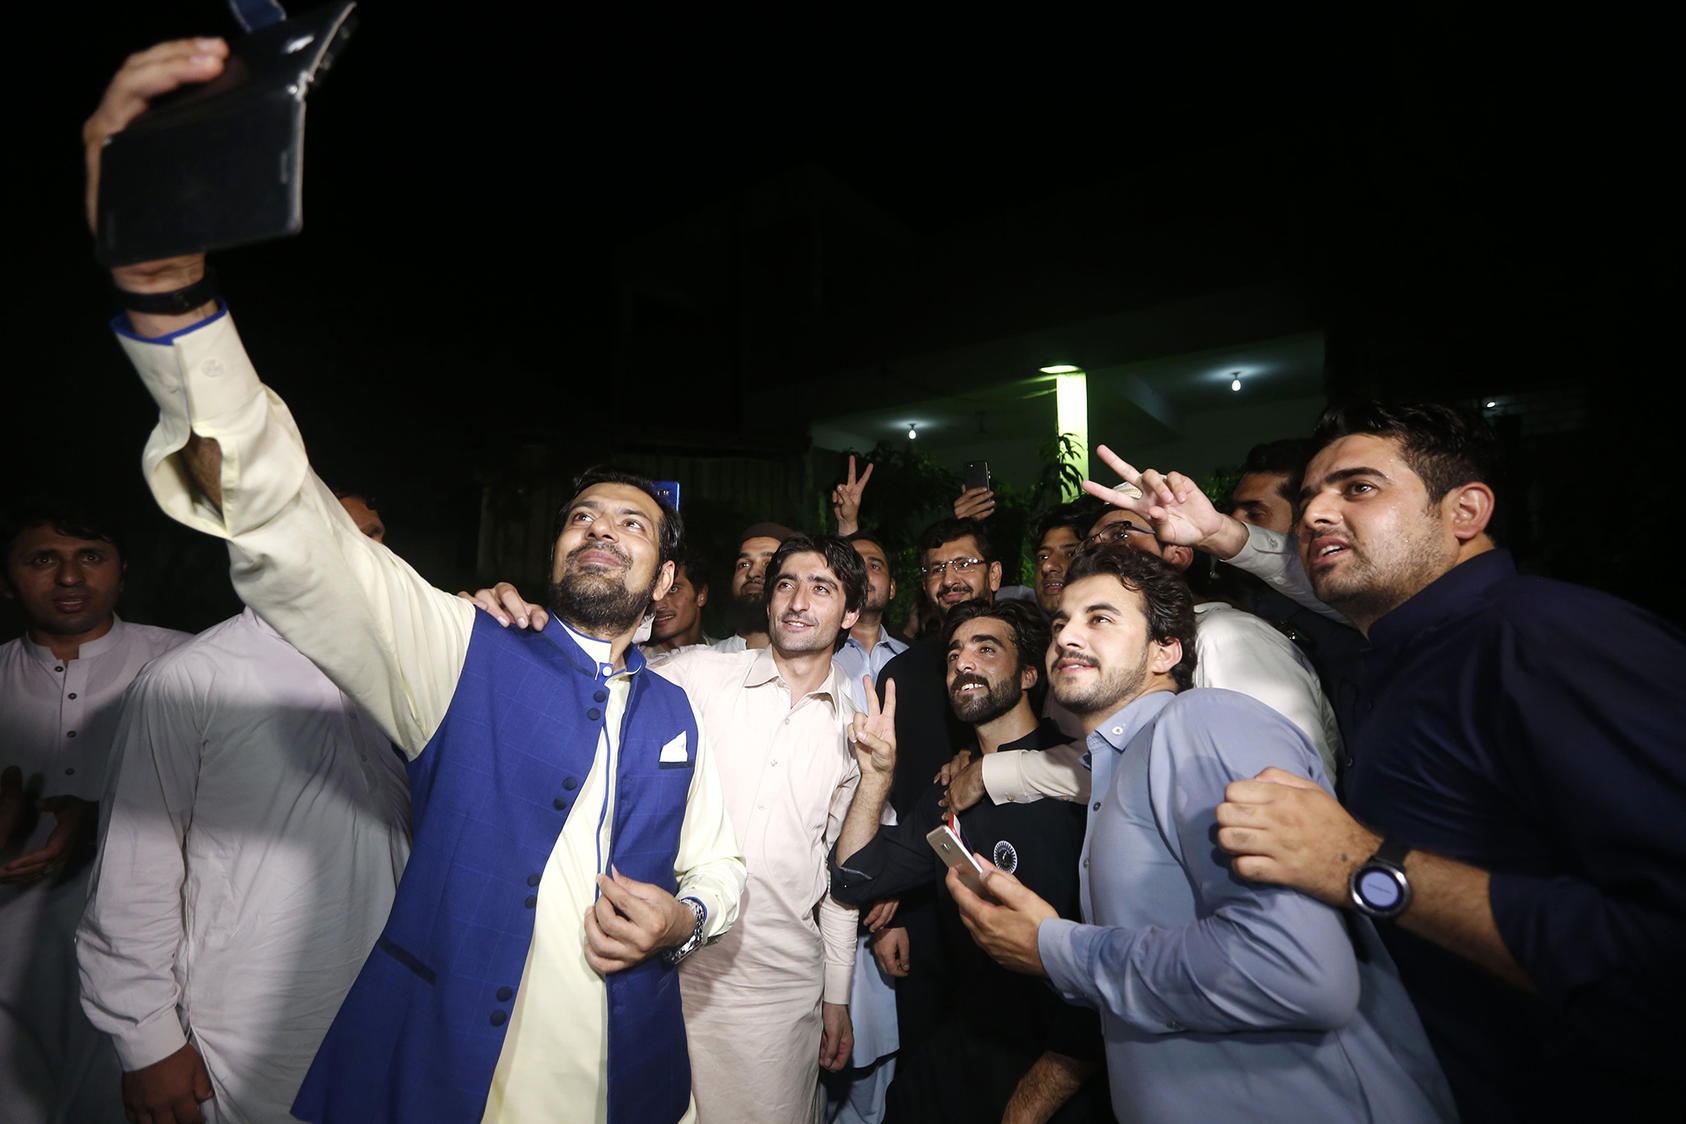 Supporters of the FATA youth jirga celebrate the merger of Khyber Pakhtunkhwa Province and the Federally Administered Tribal Areas in May 2018. (Bilawal Arbab/ EPA-EFE/ Shutterstock)